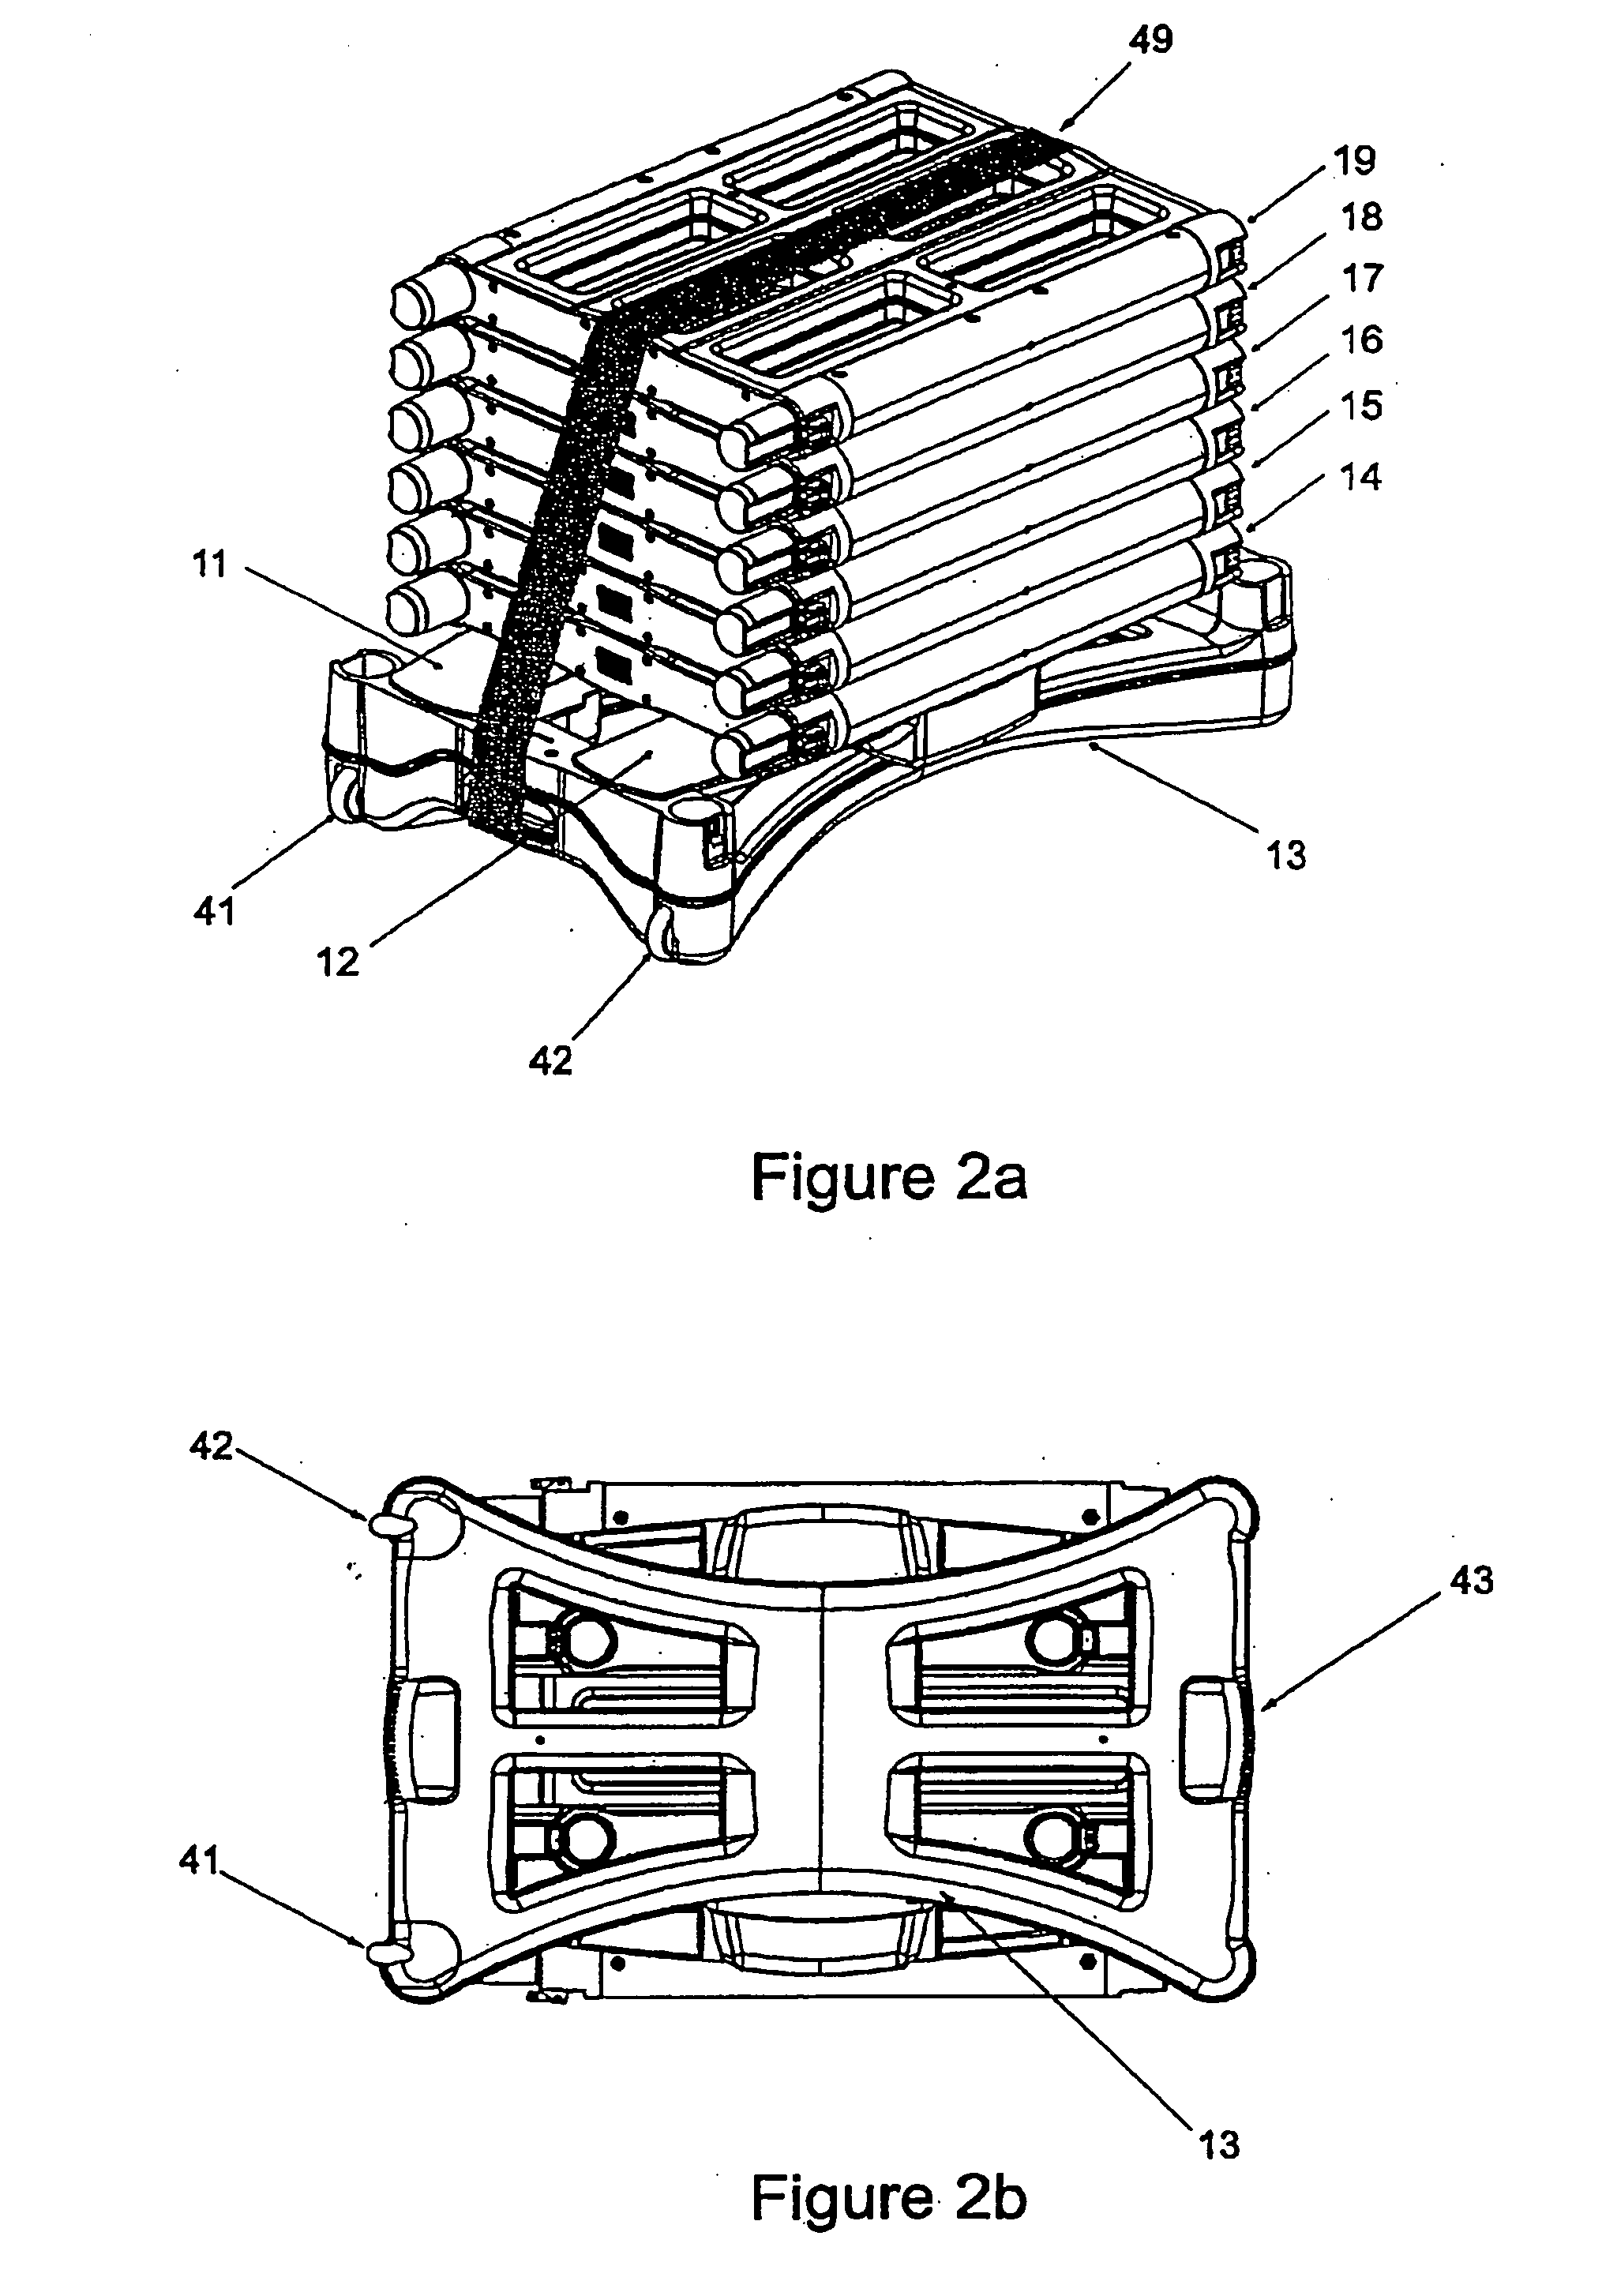 Systems and methods for a portable walk-through metal detector